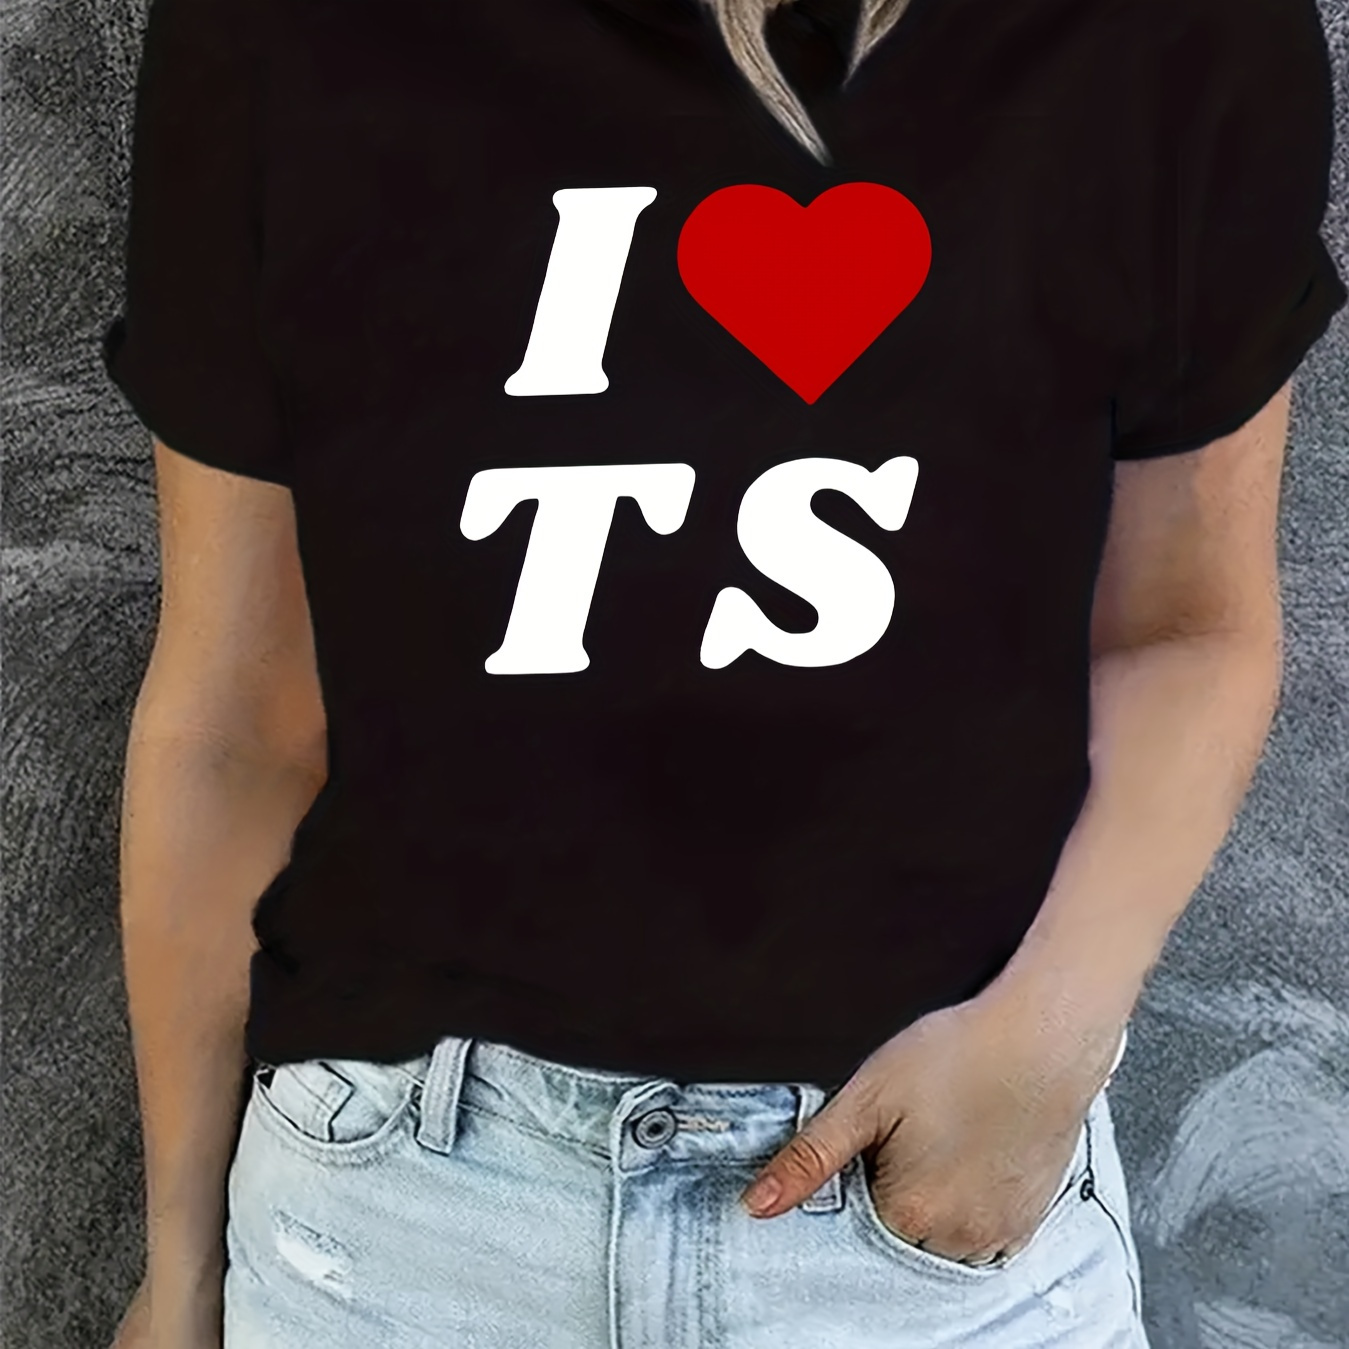 

I Love Ts Graphic Sports Tee, Breathable Short Sleeve Fashion Workout Fitness Top, Women's Activewear